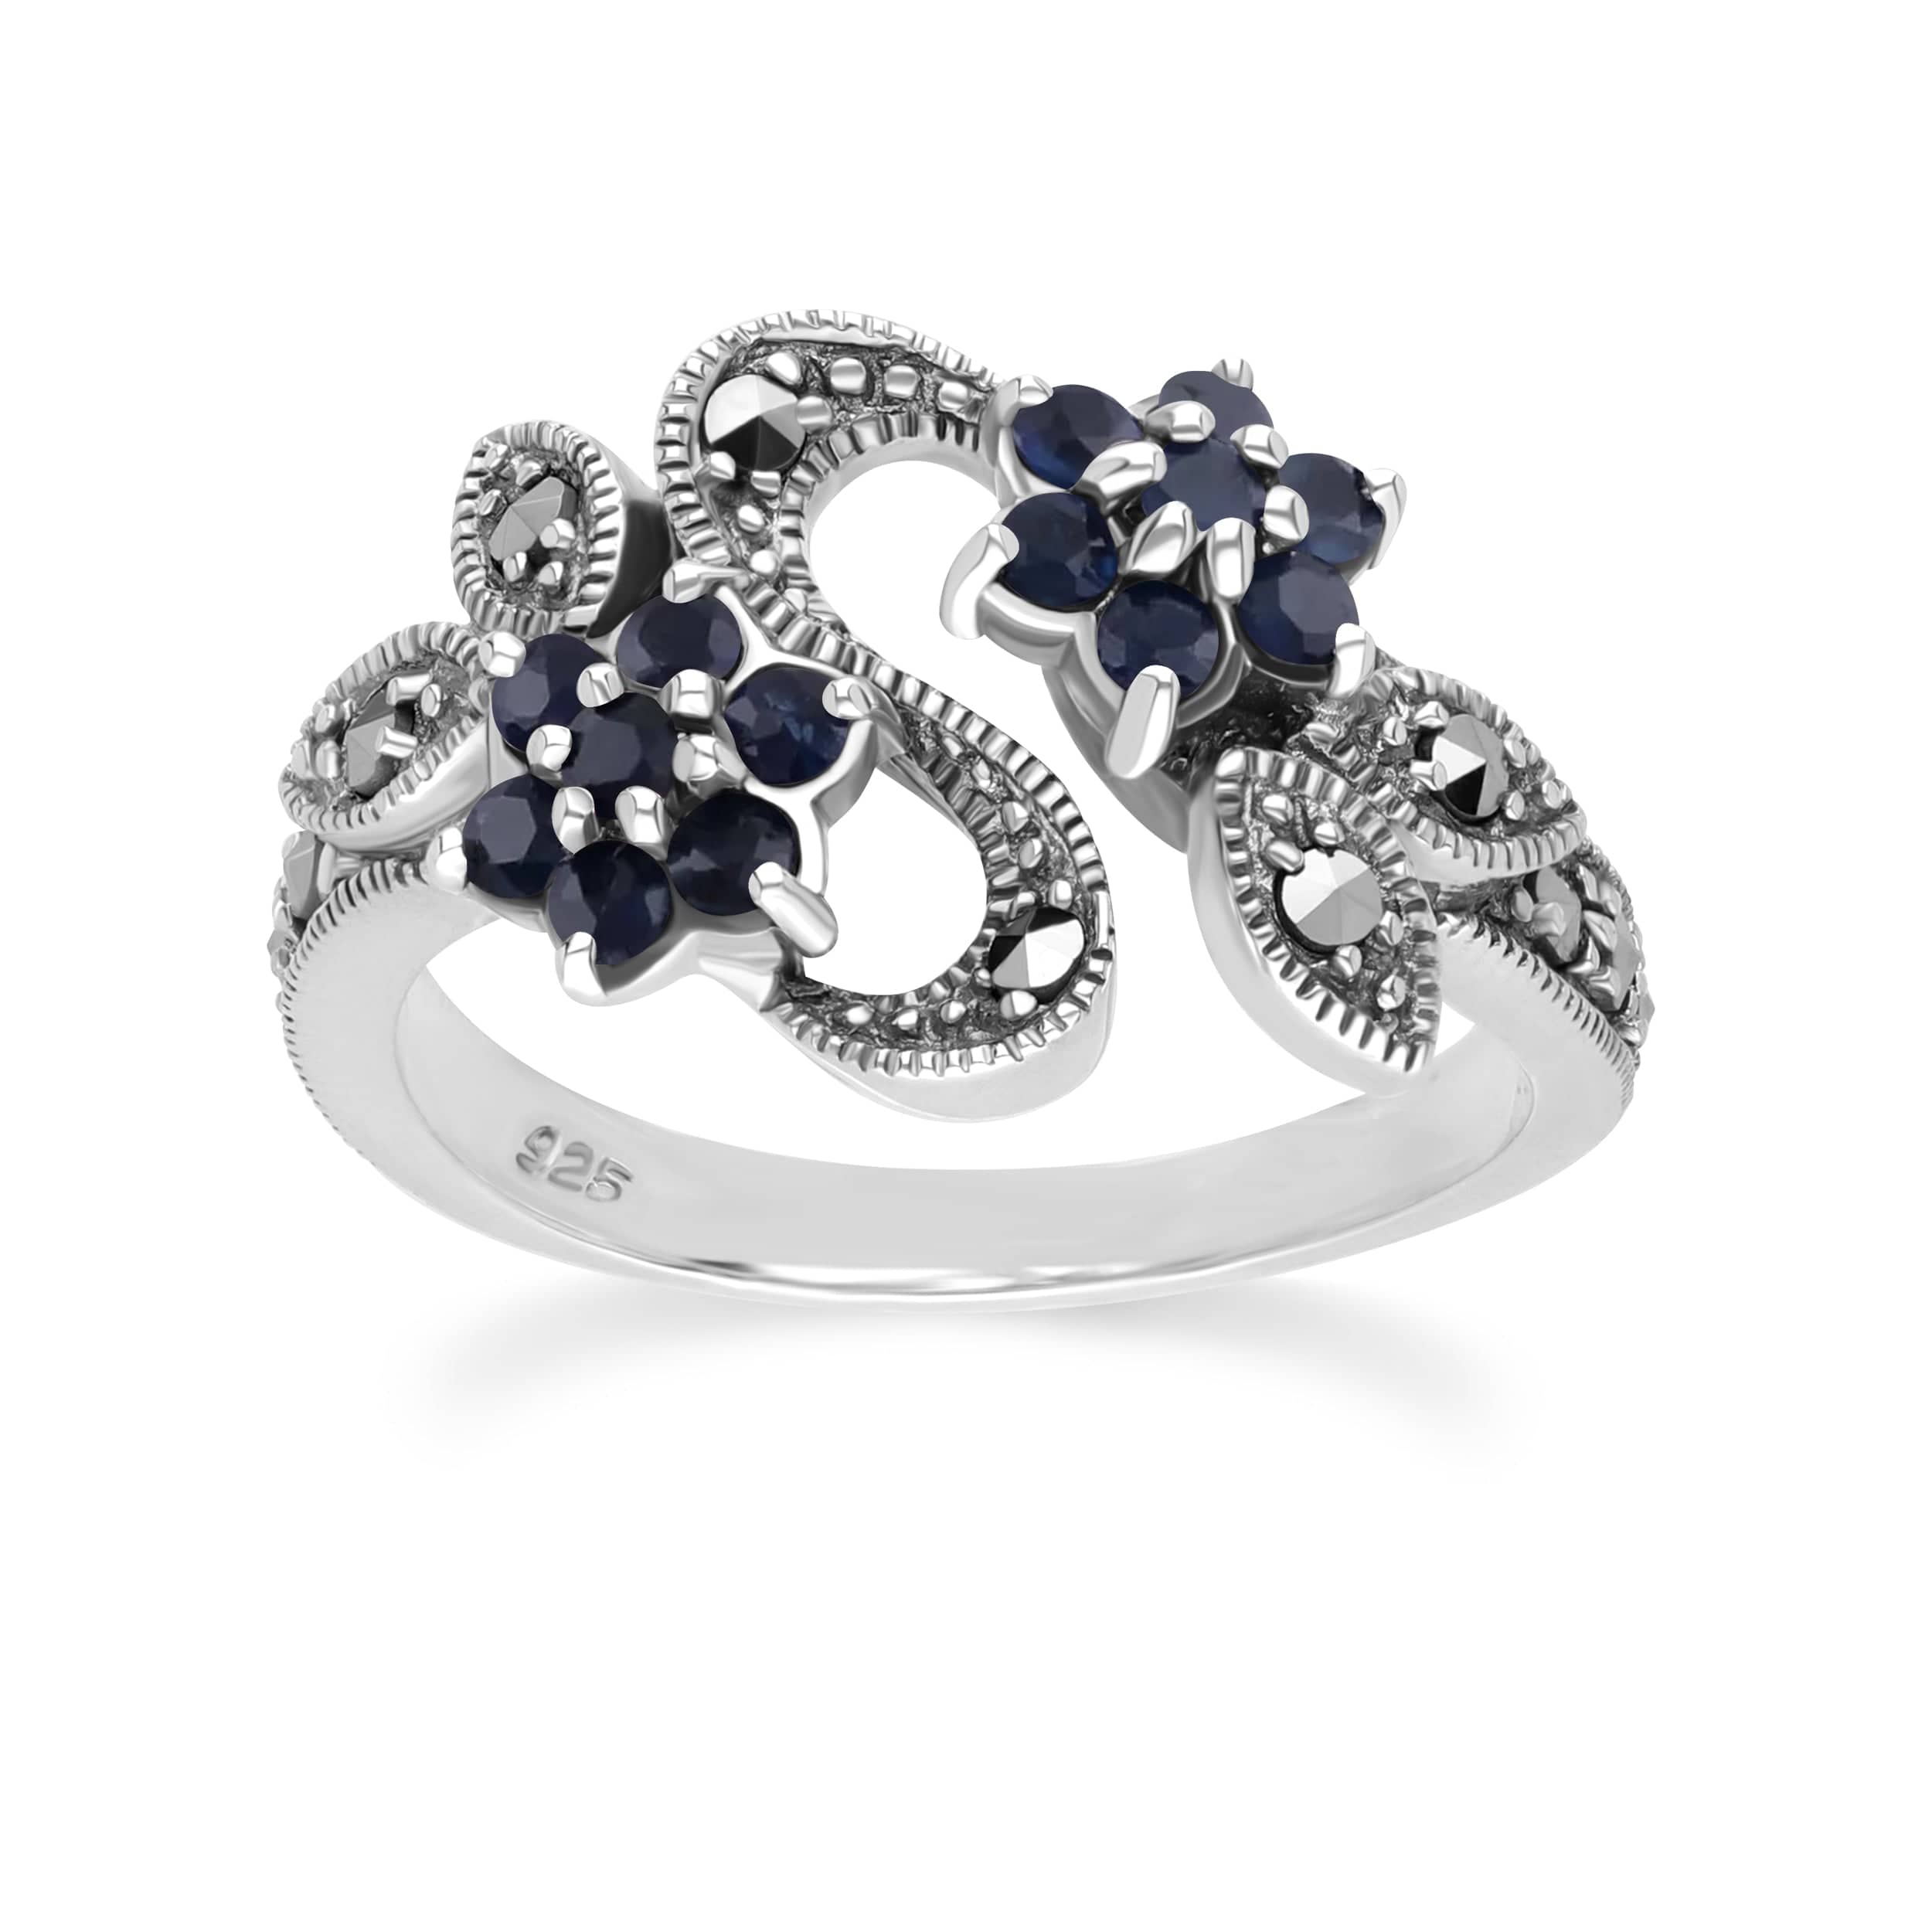 214R247404925 Art Nouveau Style Round Sapphire & Marcasite Flower Ring in 925 Sterling Silver 1